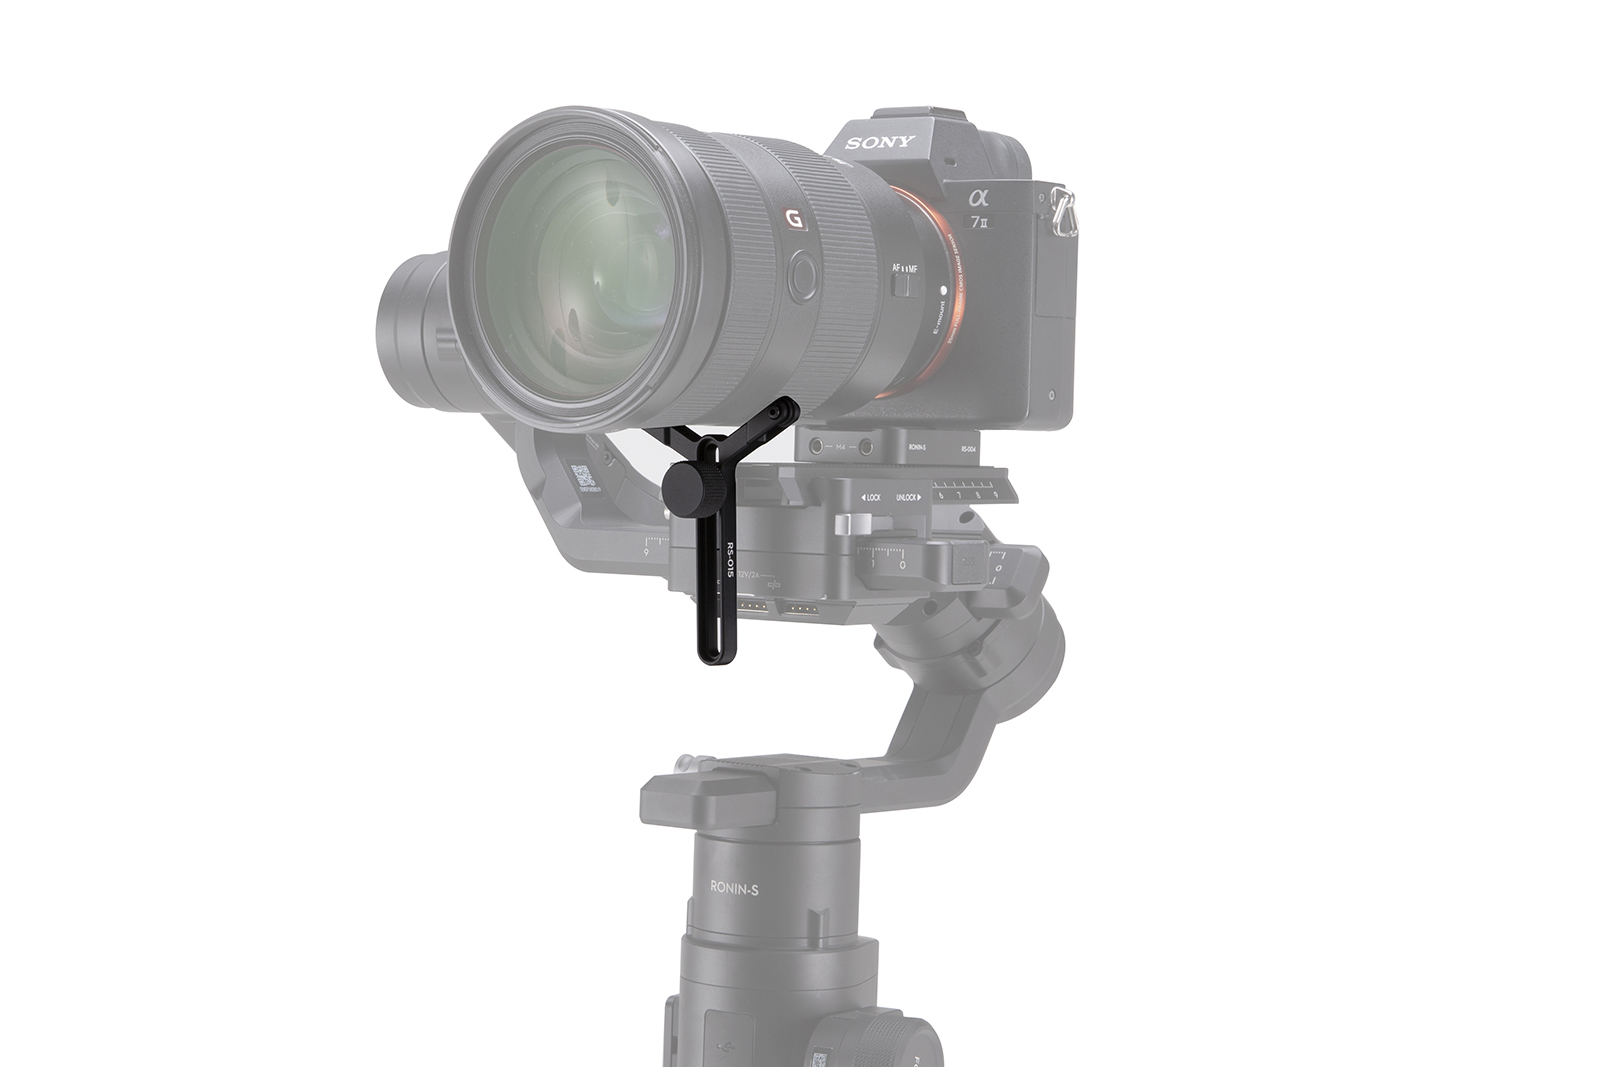 dji ronin s accessories announced extended lens support 2